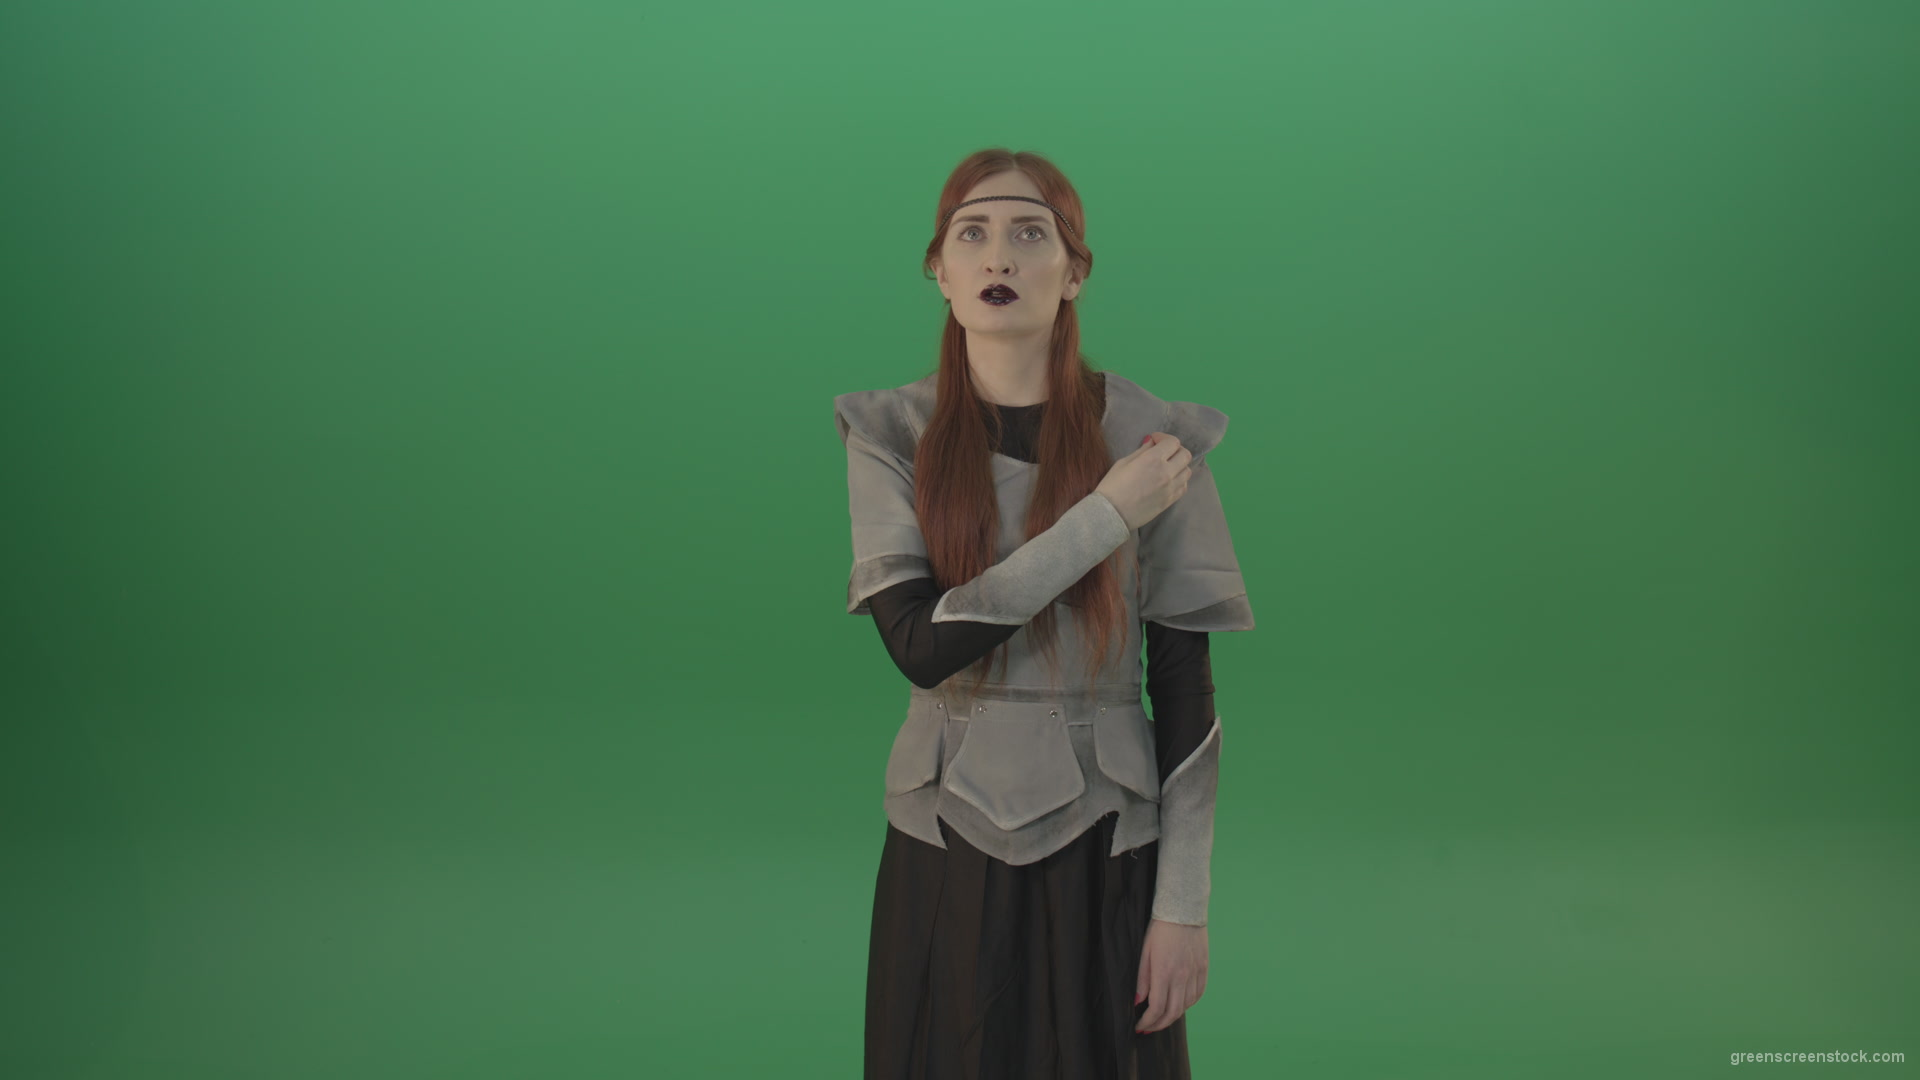 Actress-red-hair-girl-in-a-medieval-war-dress-crosses-praying-to-God-on-green-screen_006 Green Screen Stock